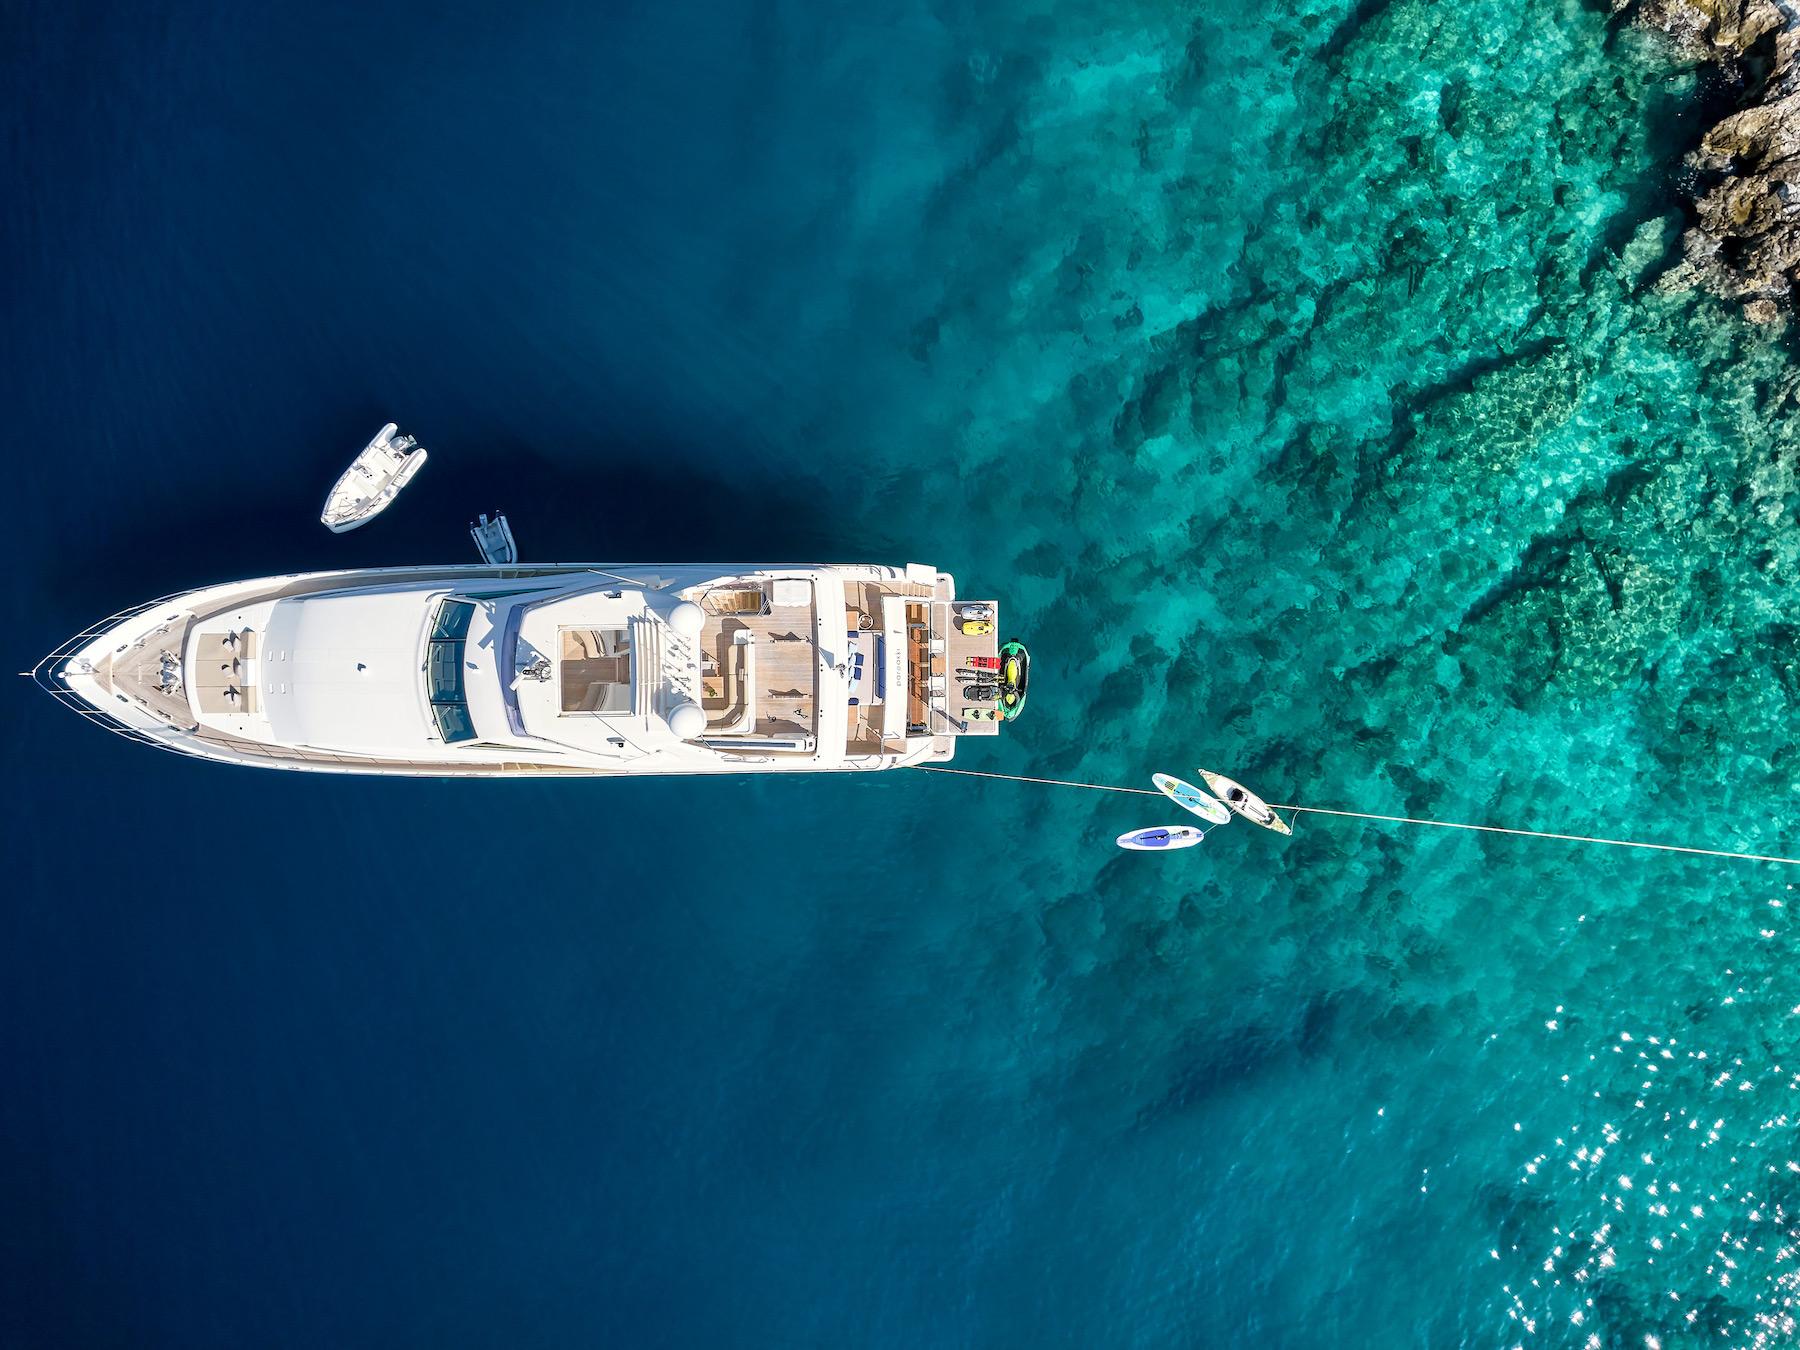 Yacht Charter Guide